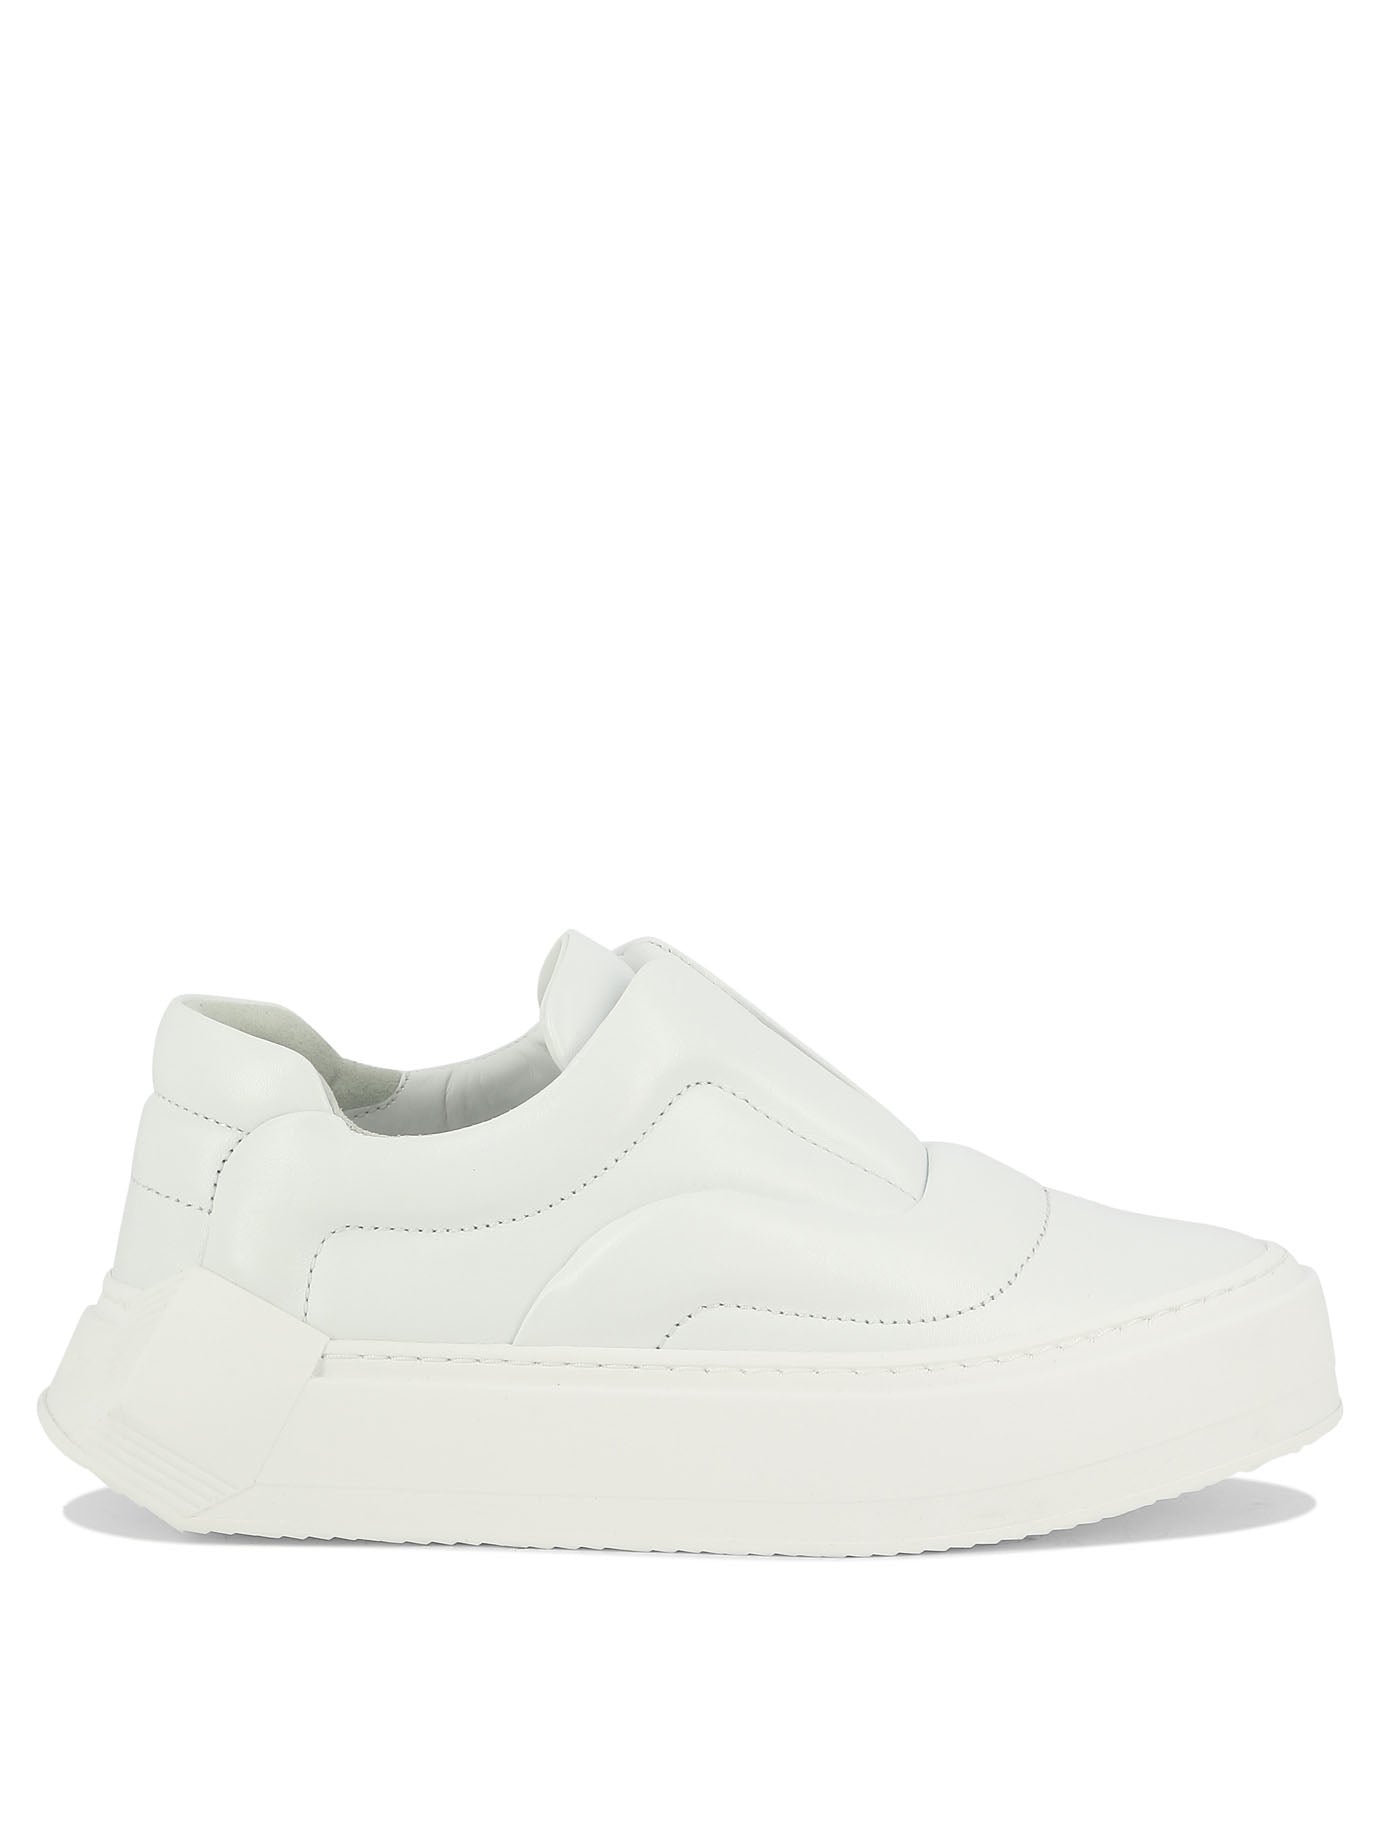 Pierre Hardy Cubix Trainers & Slip-on In White